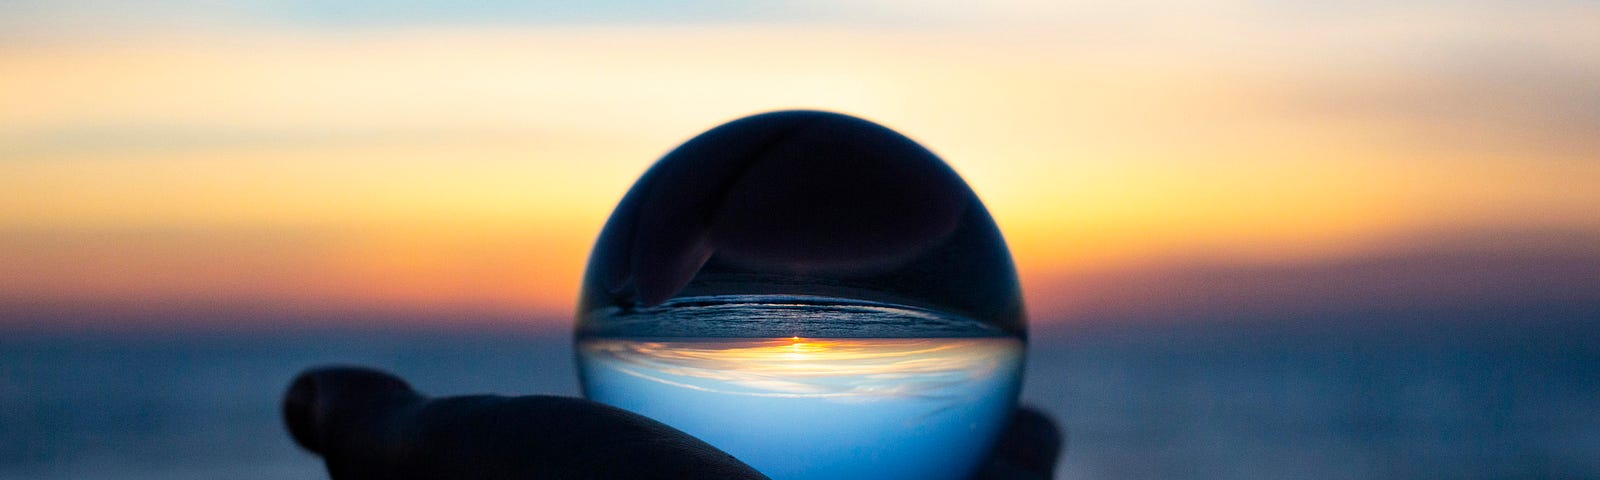 Photo of a person holding a glass ball reflecting the sea